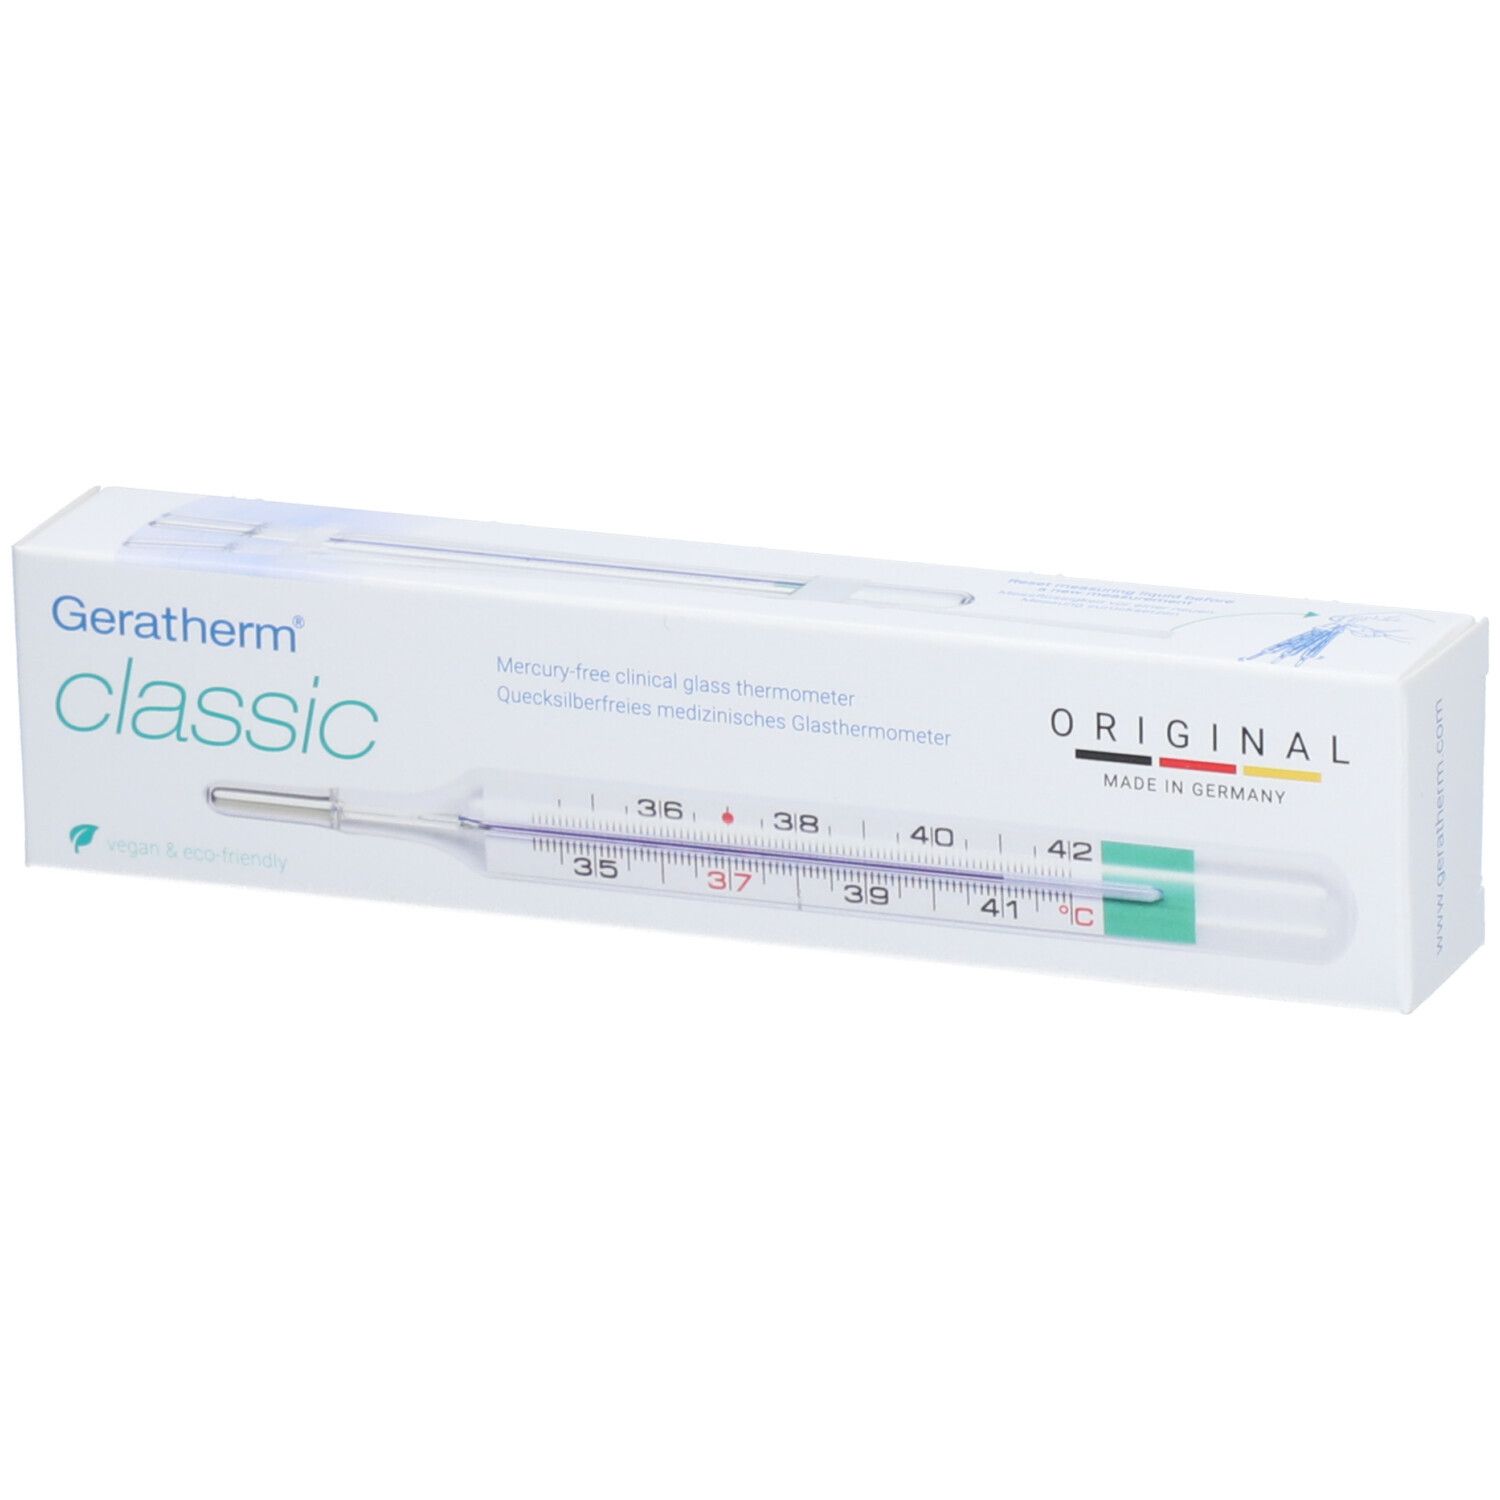 Image of Geratherm® classic Fieberthermometer